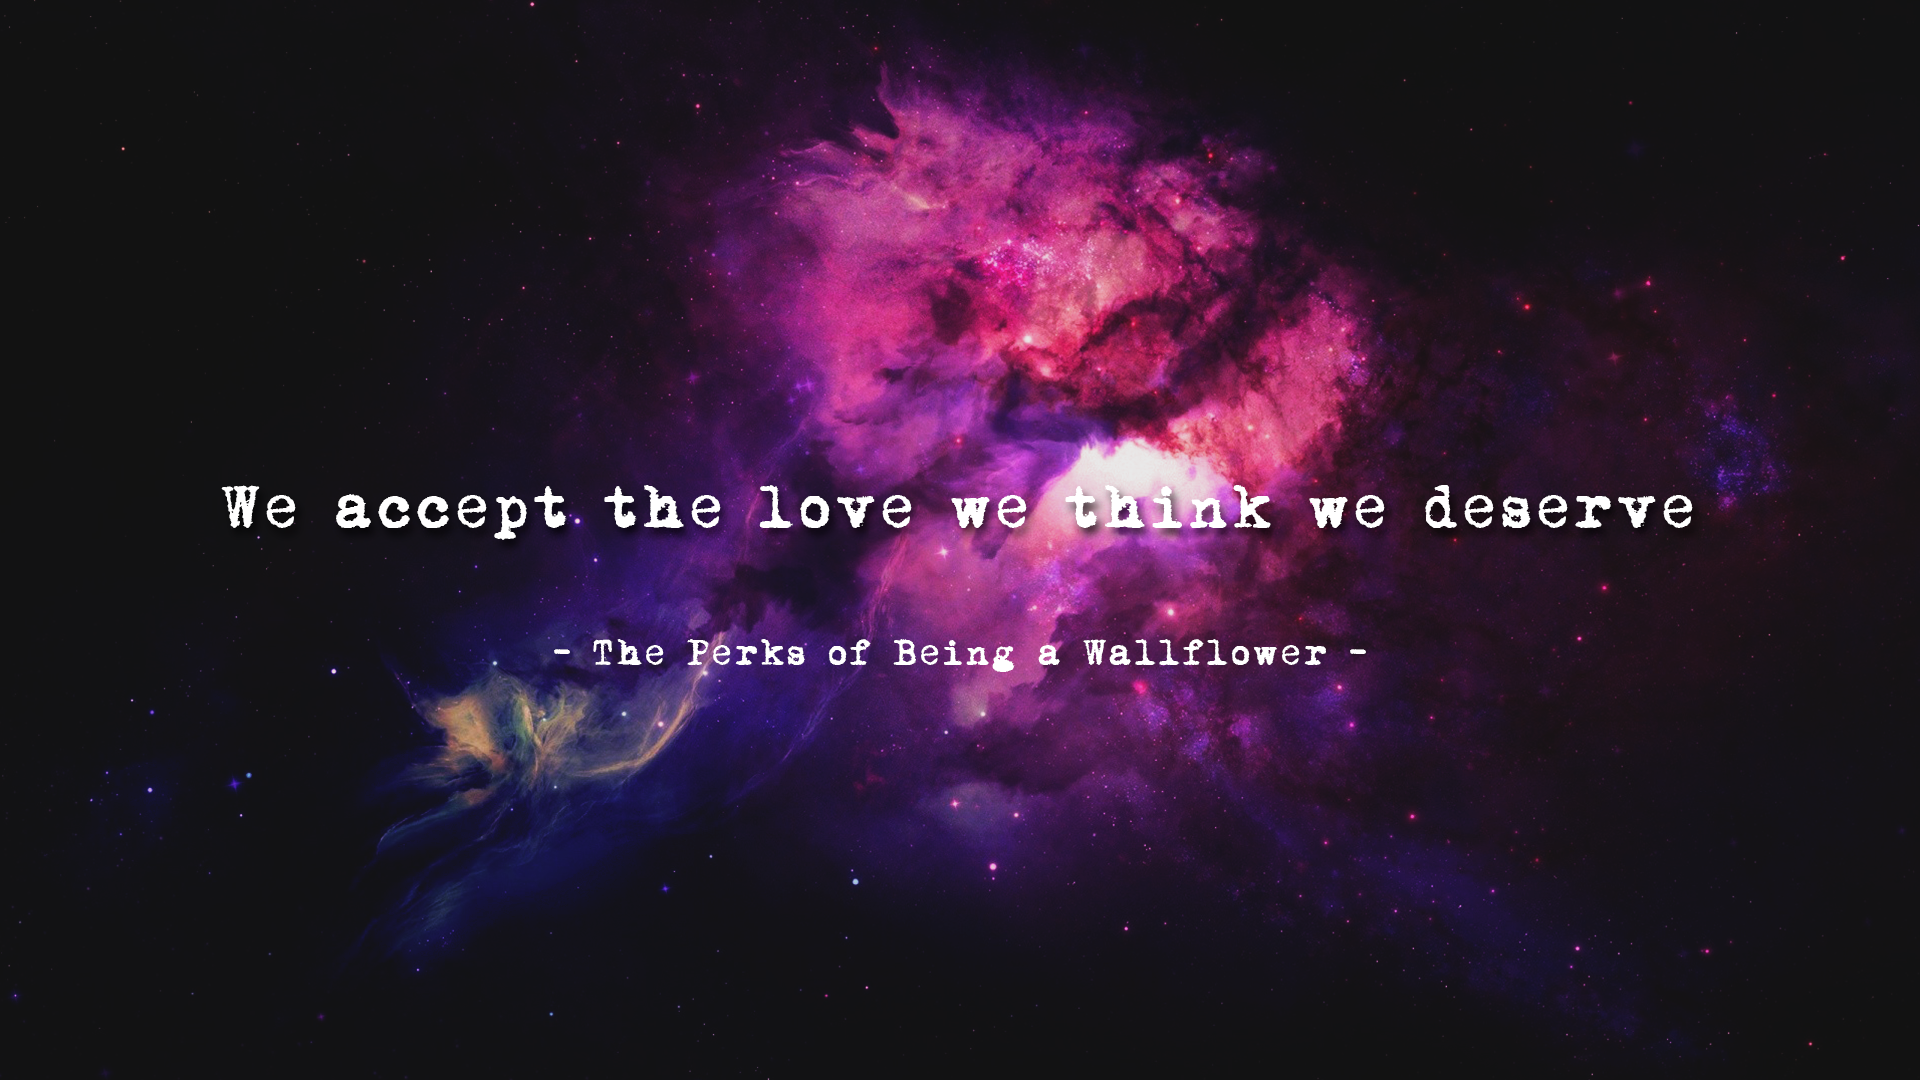 General 1920x1080 quote artwork space nebula The Perks of Being a Wallflower